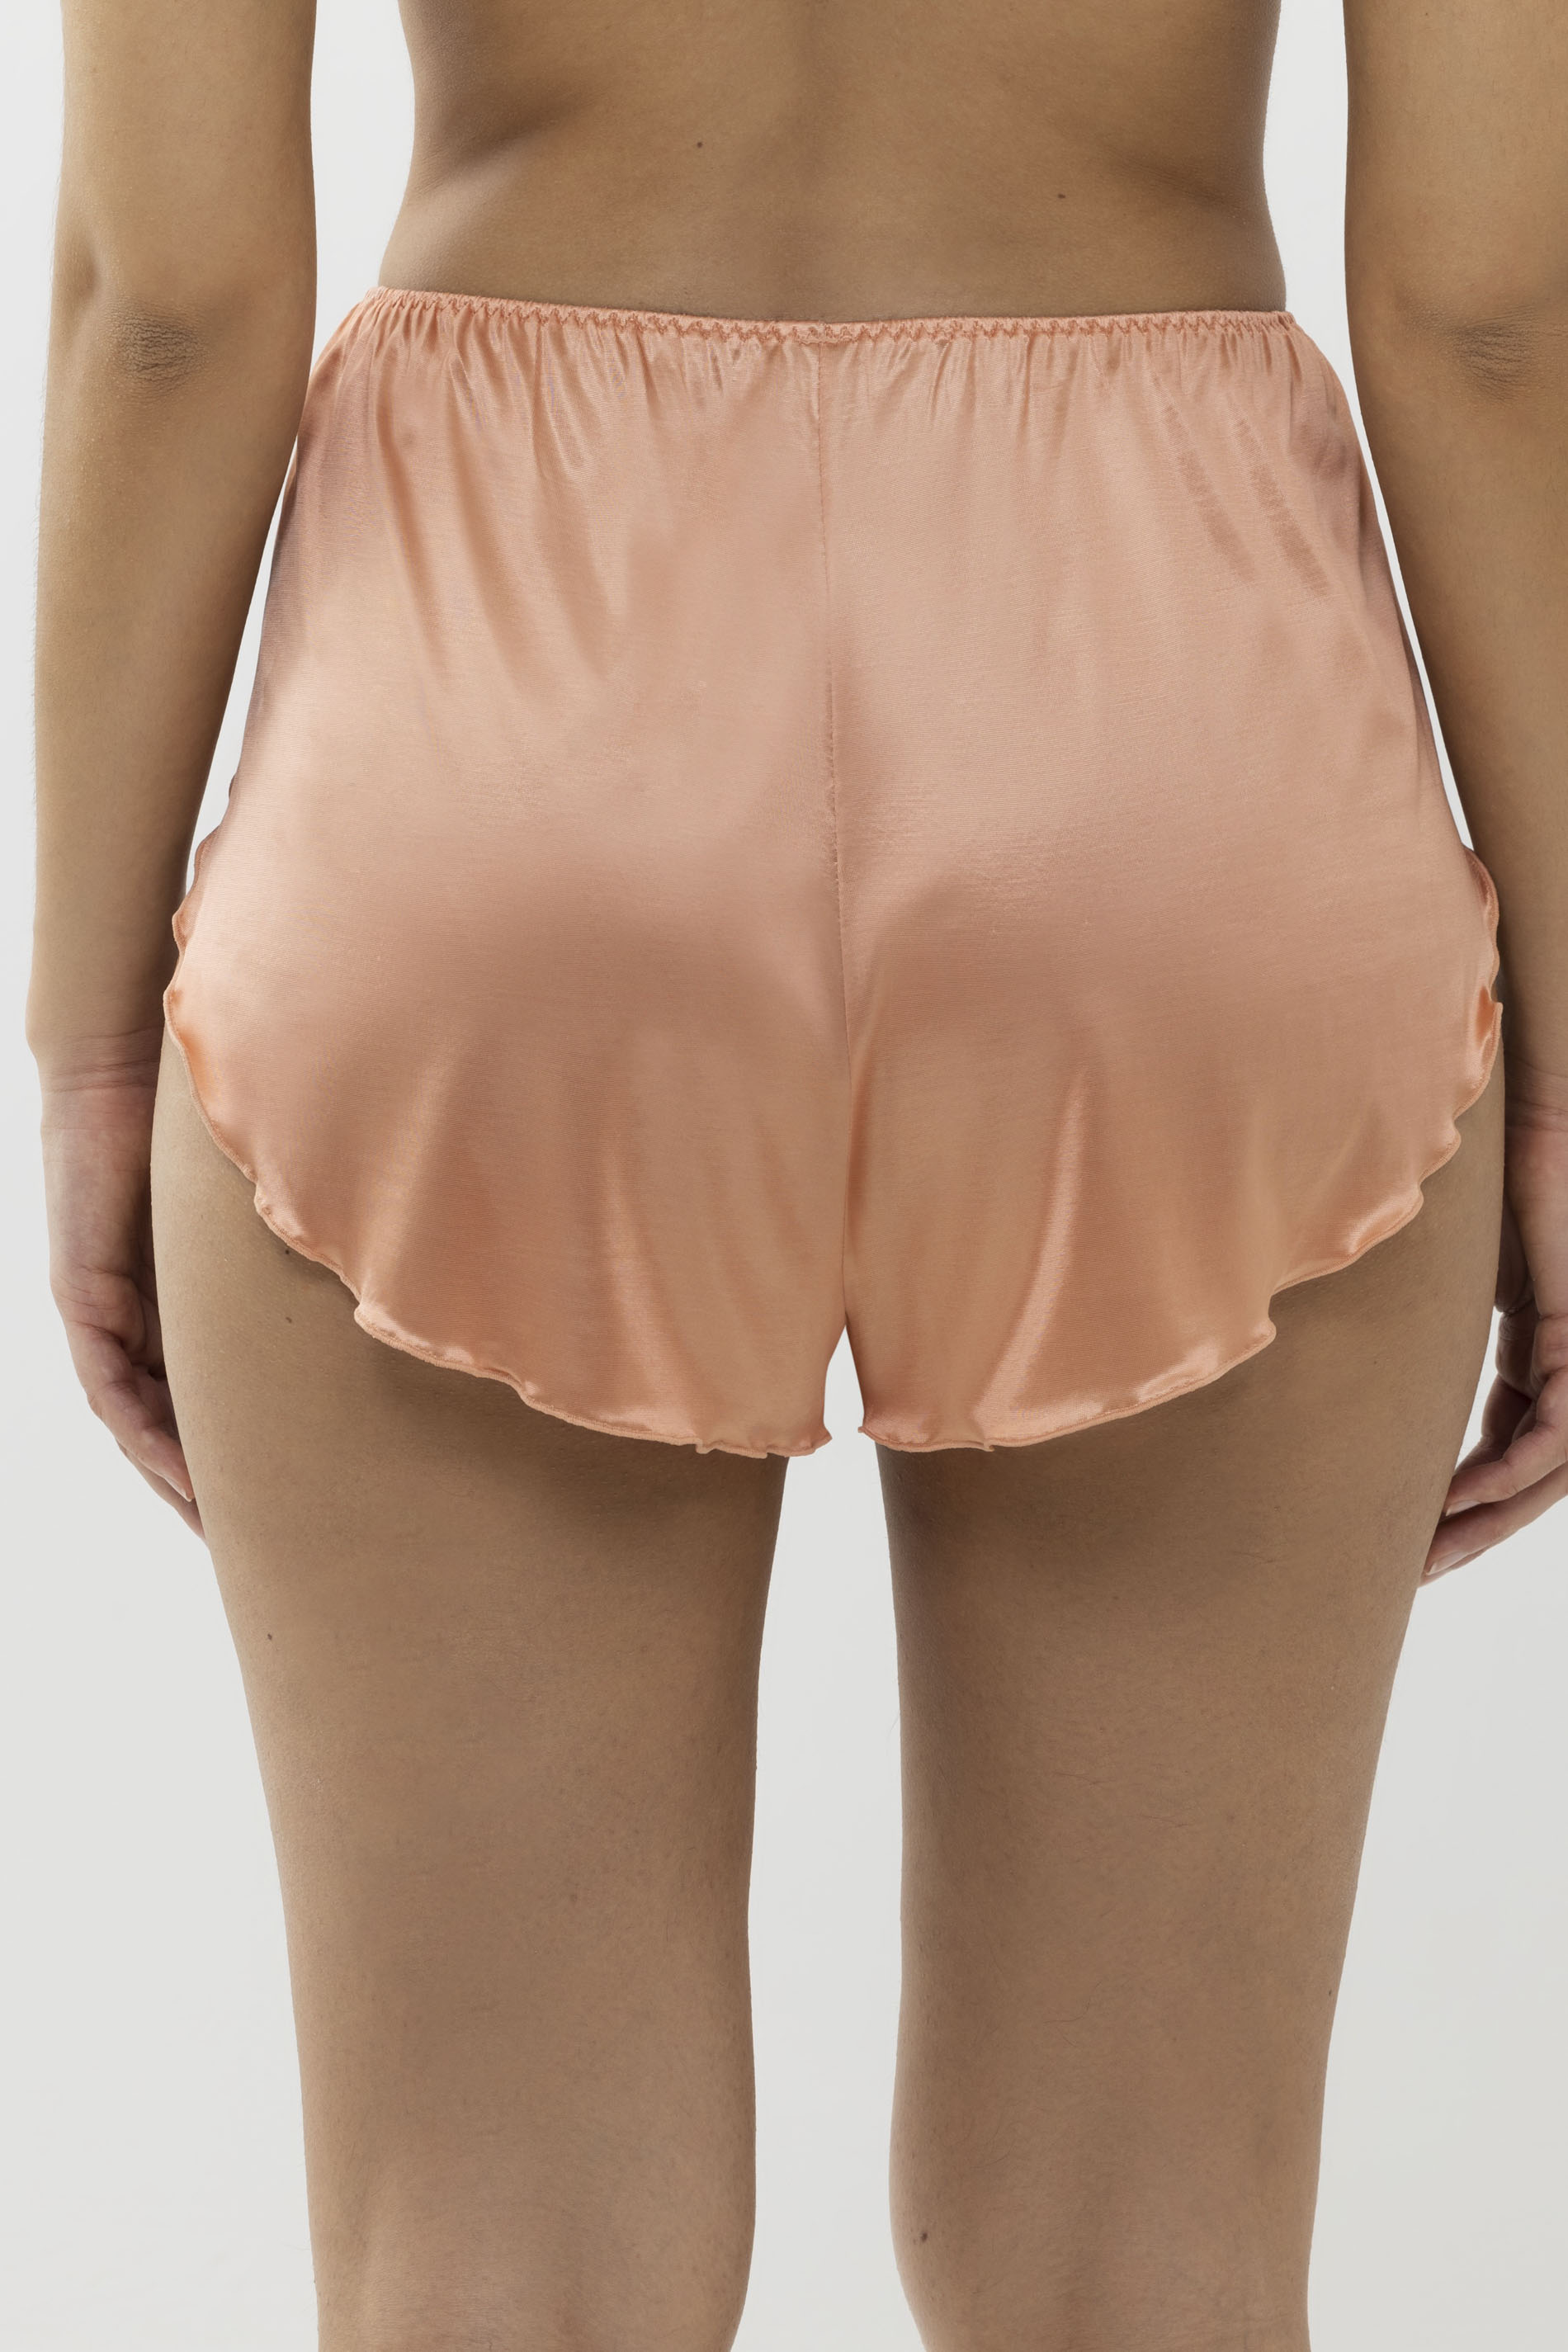 French knickers Serie Coco Achteraanzicht | mey®